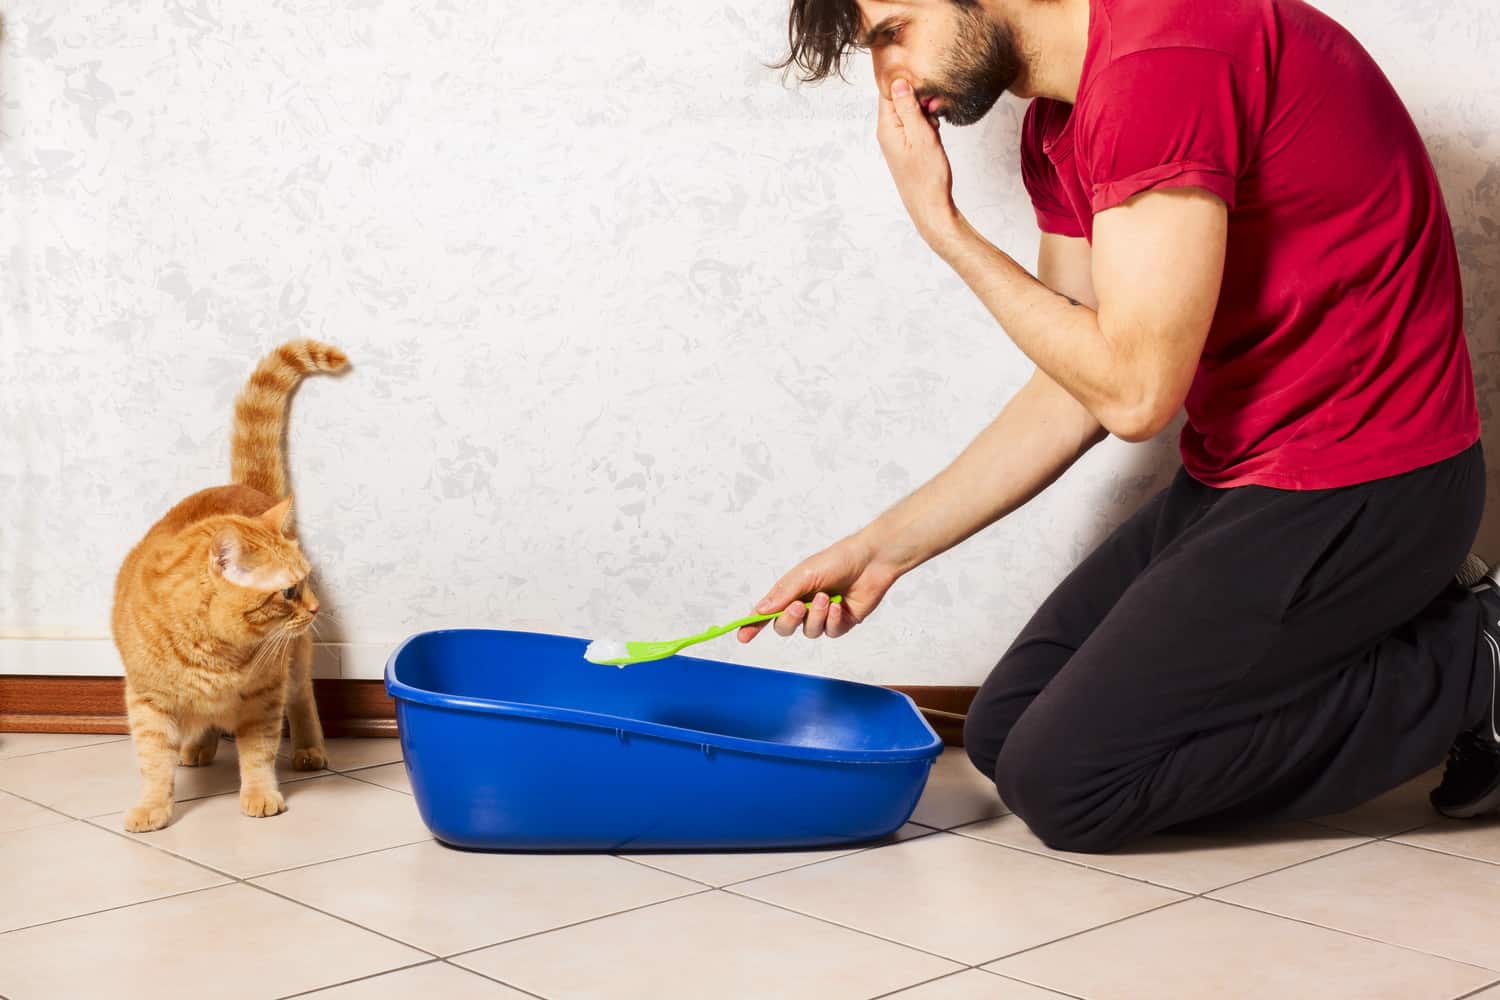 Adult person's hand removing and cleaning cat litter box from clumps of cat urine and feces